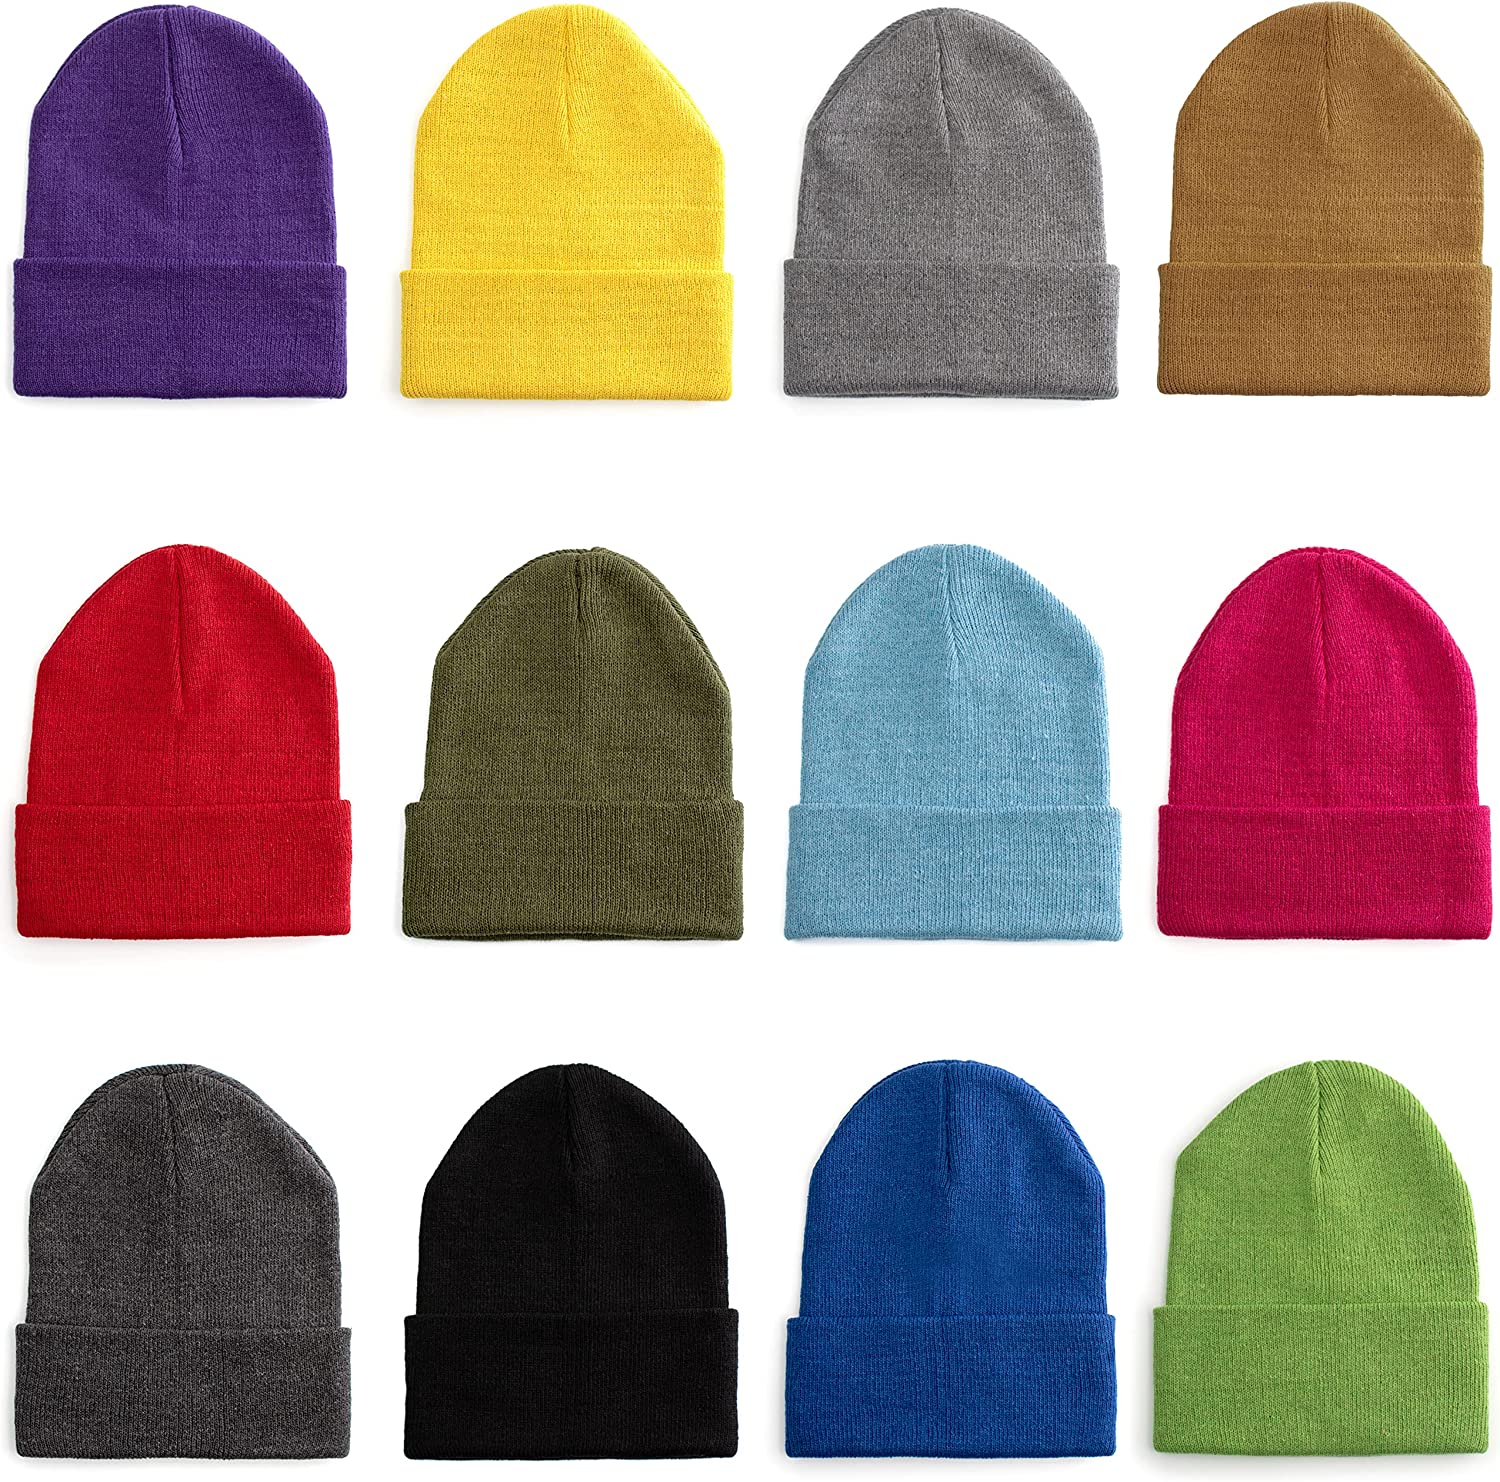 24 Set Wholesale Beanie and Glove Bundle in 12 Assorted Colors - Bulk Case of 24 Beanies, 24 Pairs of Gloves